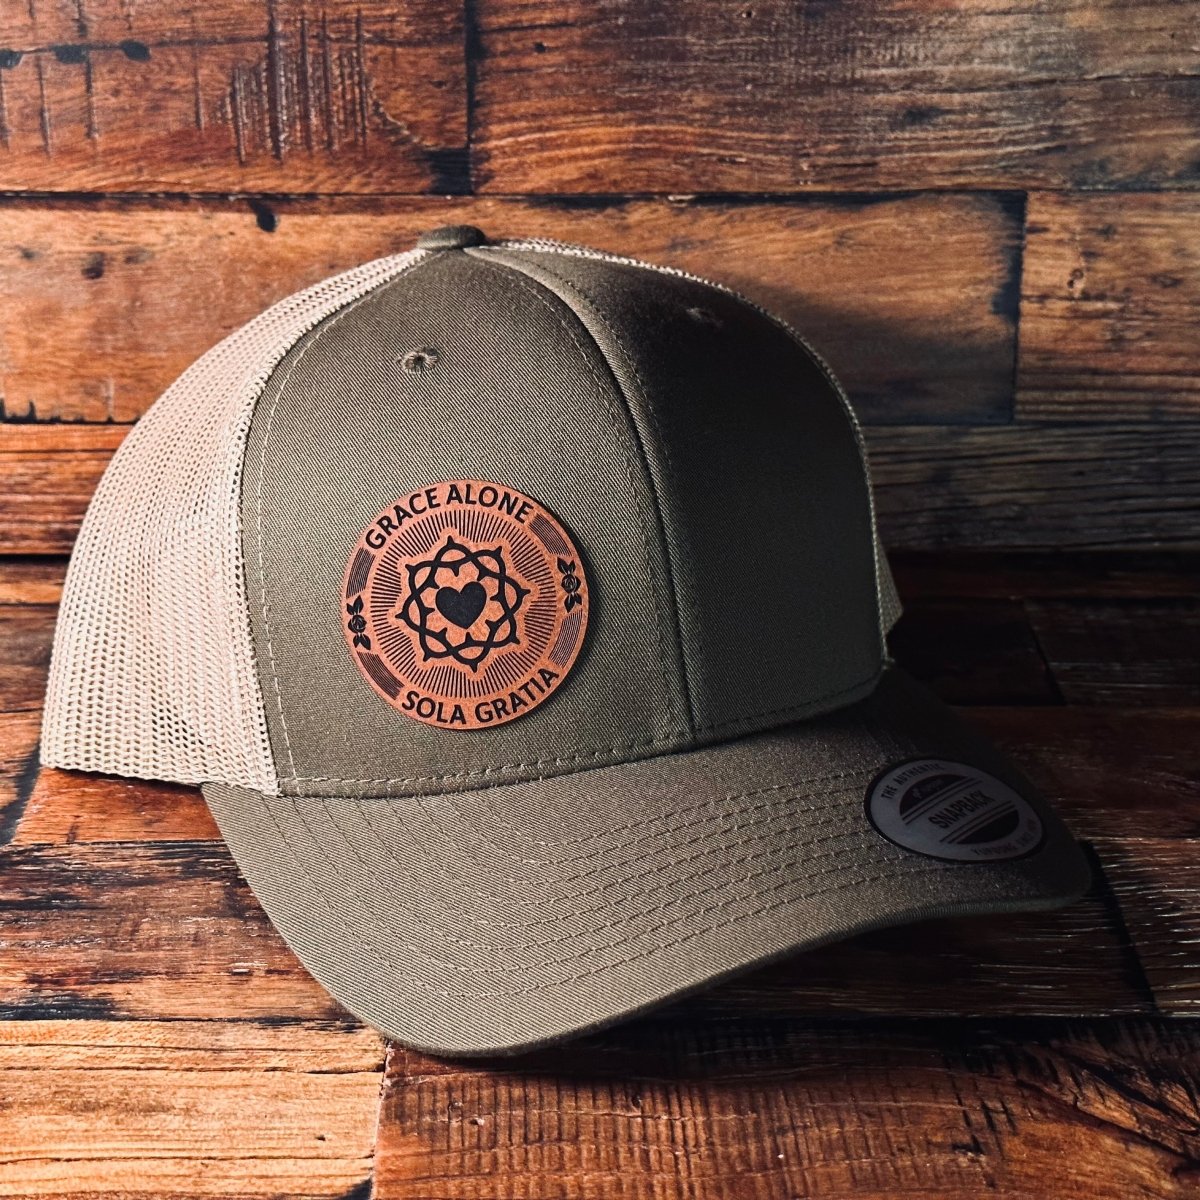 Hat - Sola Gratia Seal - Patch Hat - The Reformed Sage - #reformed# - #reformed_gifts# - #christian_gifts#